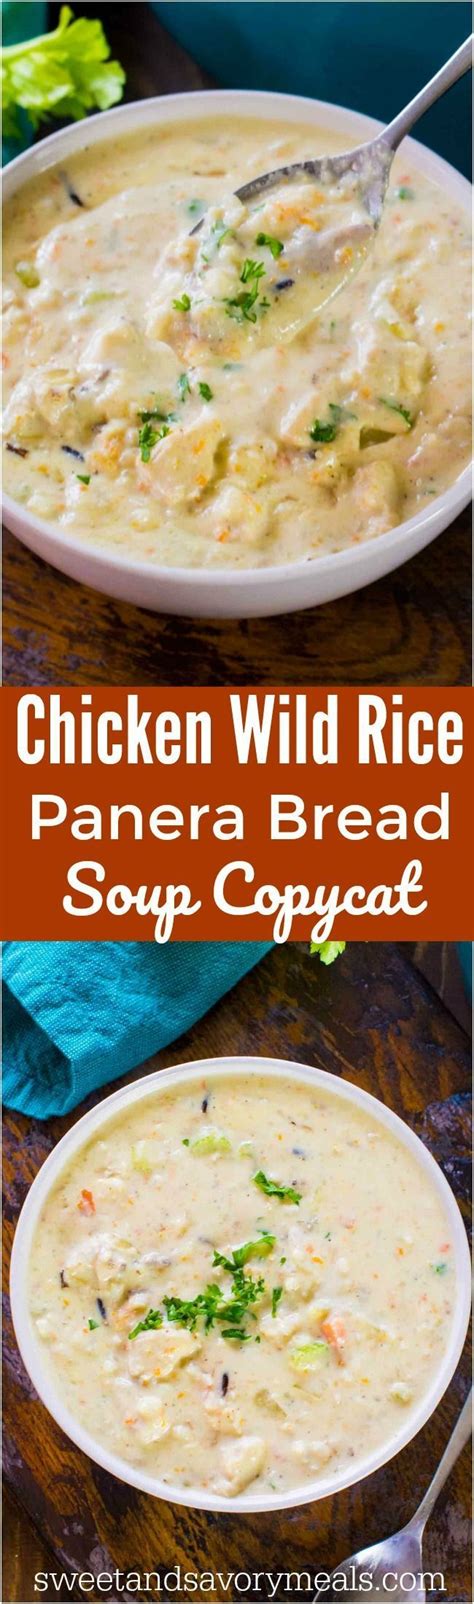 Sep 25, 2020 · for this recipe you'll need chicken broth, near east long grain & wild rice with flavor packet, celery, red onion, carrots, evoo, all purpose flour, heavy cream, milk, cooked diced chicken, kosher salt and black pepper. Panera Bread Chicken Wild Rice Soup | Recipe | Healthy ...